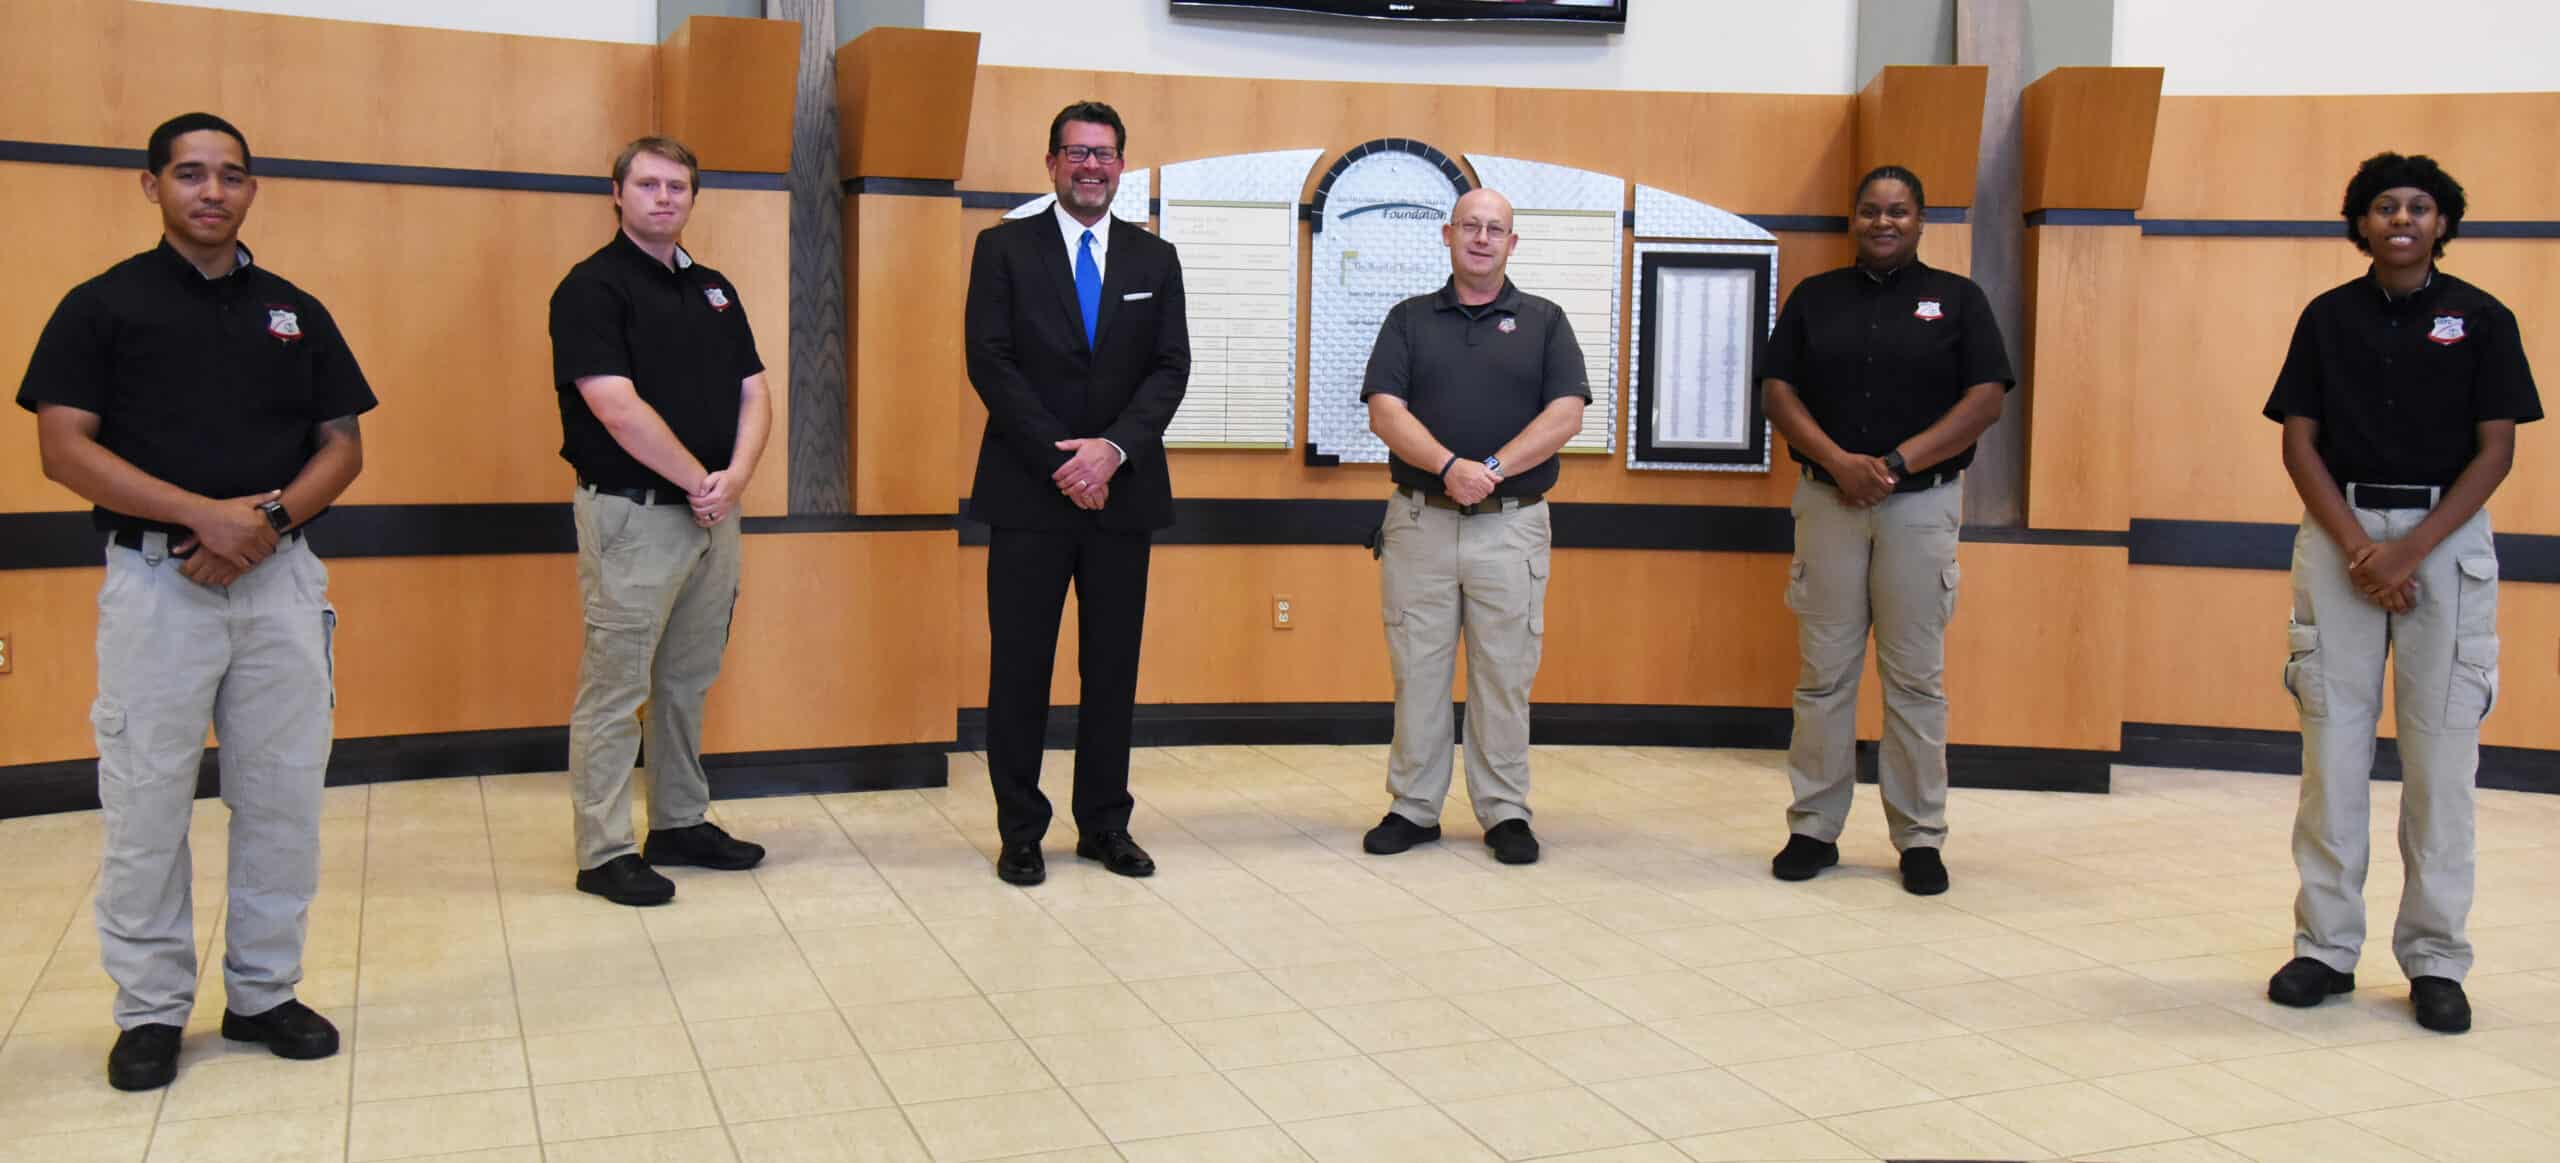 South Georgia Technical College President Dr. John Watford (left center), LEA Academy Director Brett Murray (right center) are shown above with the members of the South Georgia Technical College Law Enforcement Academy Class 21-01 cadets who competed their training recently. The cadets earned their POST certification and a technical certificate of credit for their course work in the academy. Shown above are: Nasier Vazquez, Matthew Perrine, Alicia Childs, and T’erra Wilkerson.